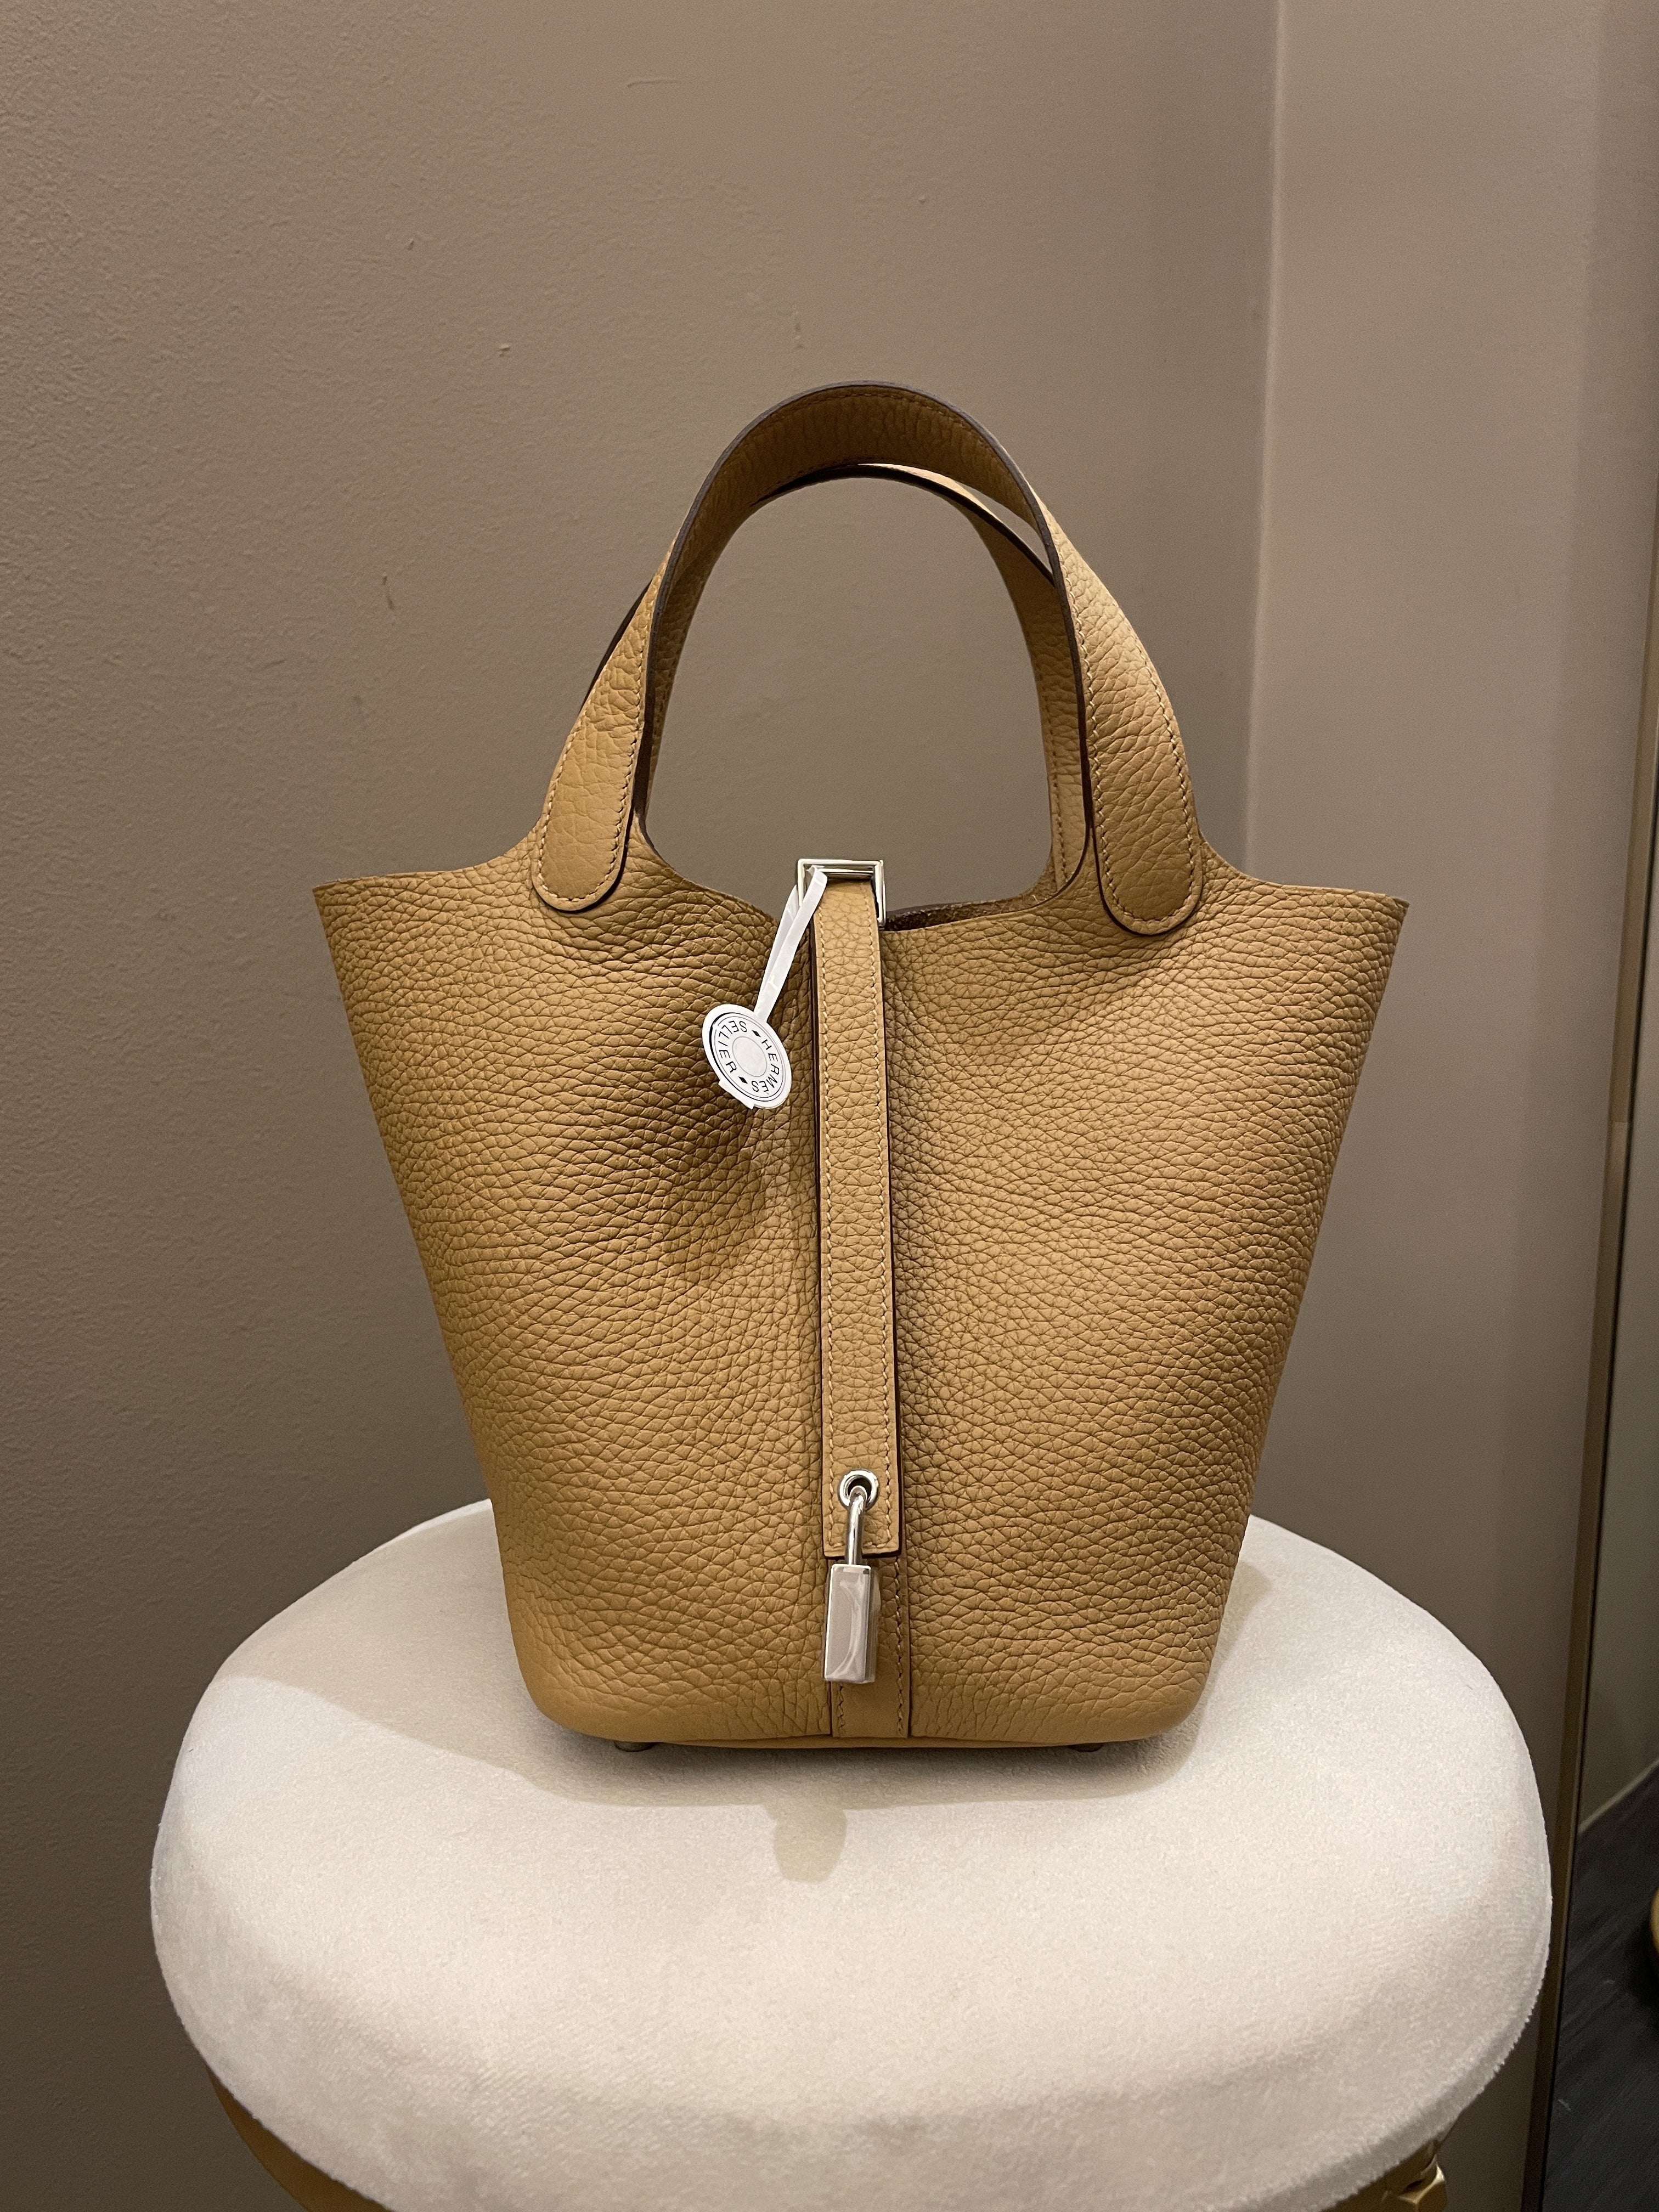 I love going out with this Hermes Picotin Lock 18 Bag : r/handbags